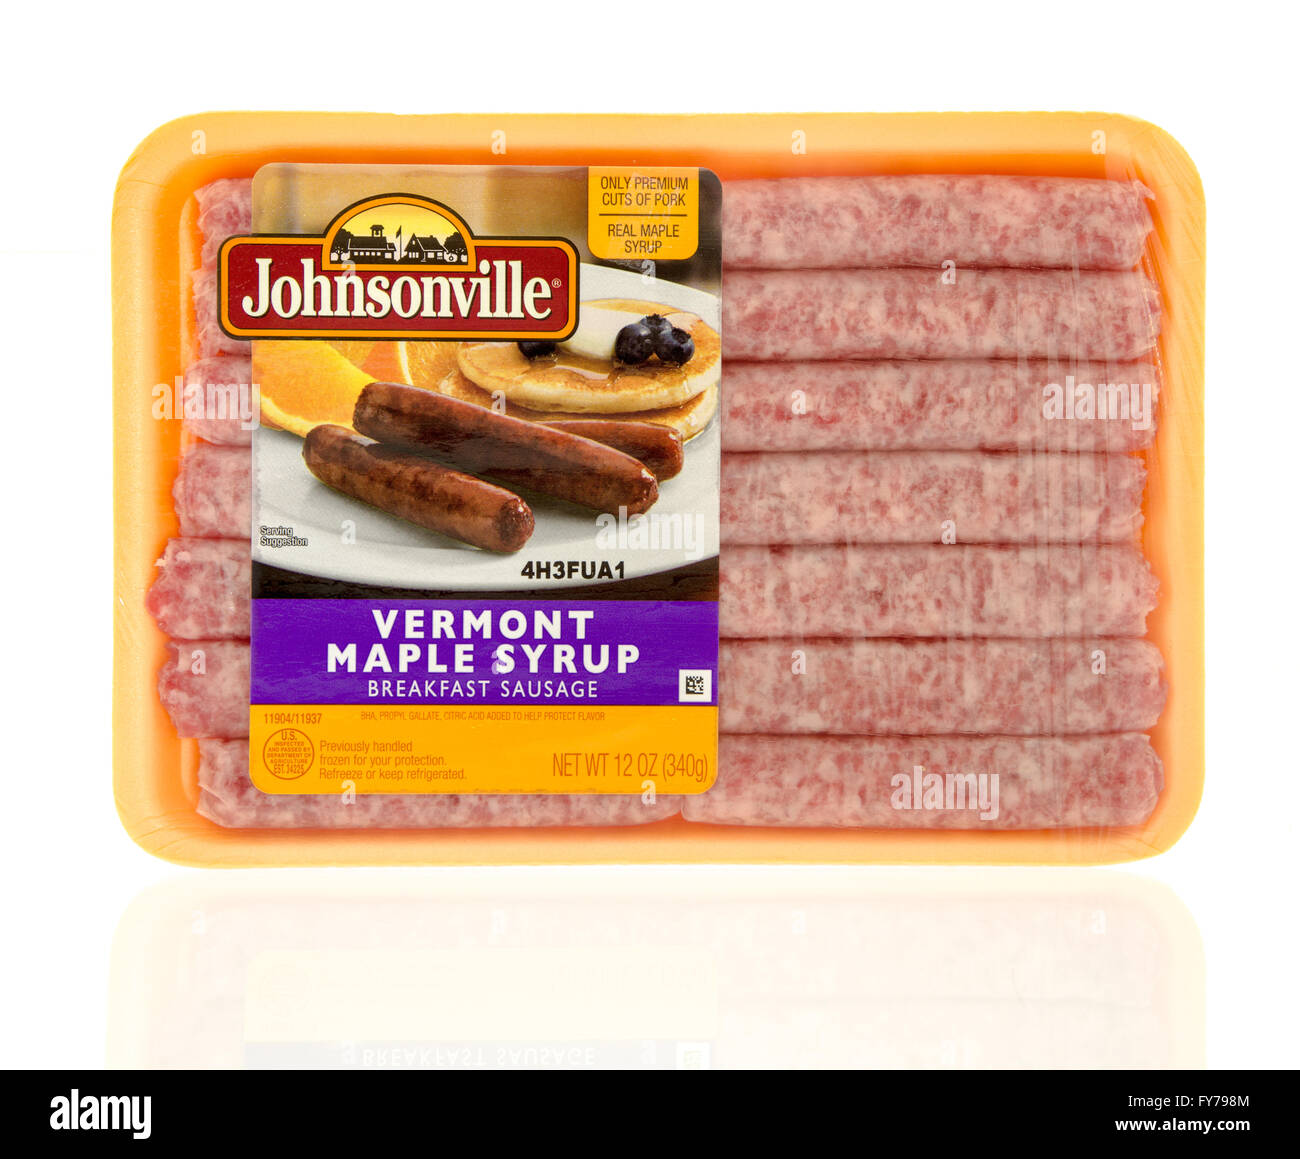 Winneconne, WI - 24 Dec 2015:  Package of Johnsonville Vermont maple syrup breakfast sausages. Stock Photo